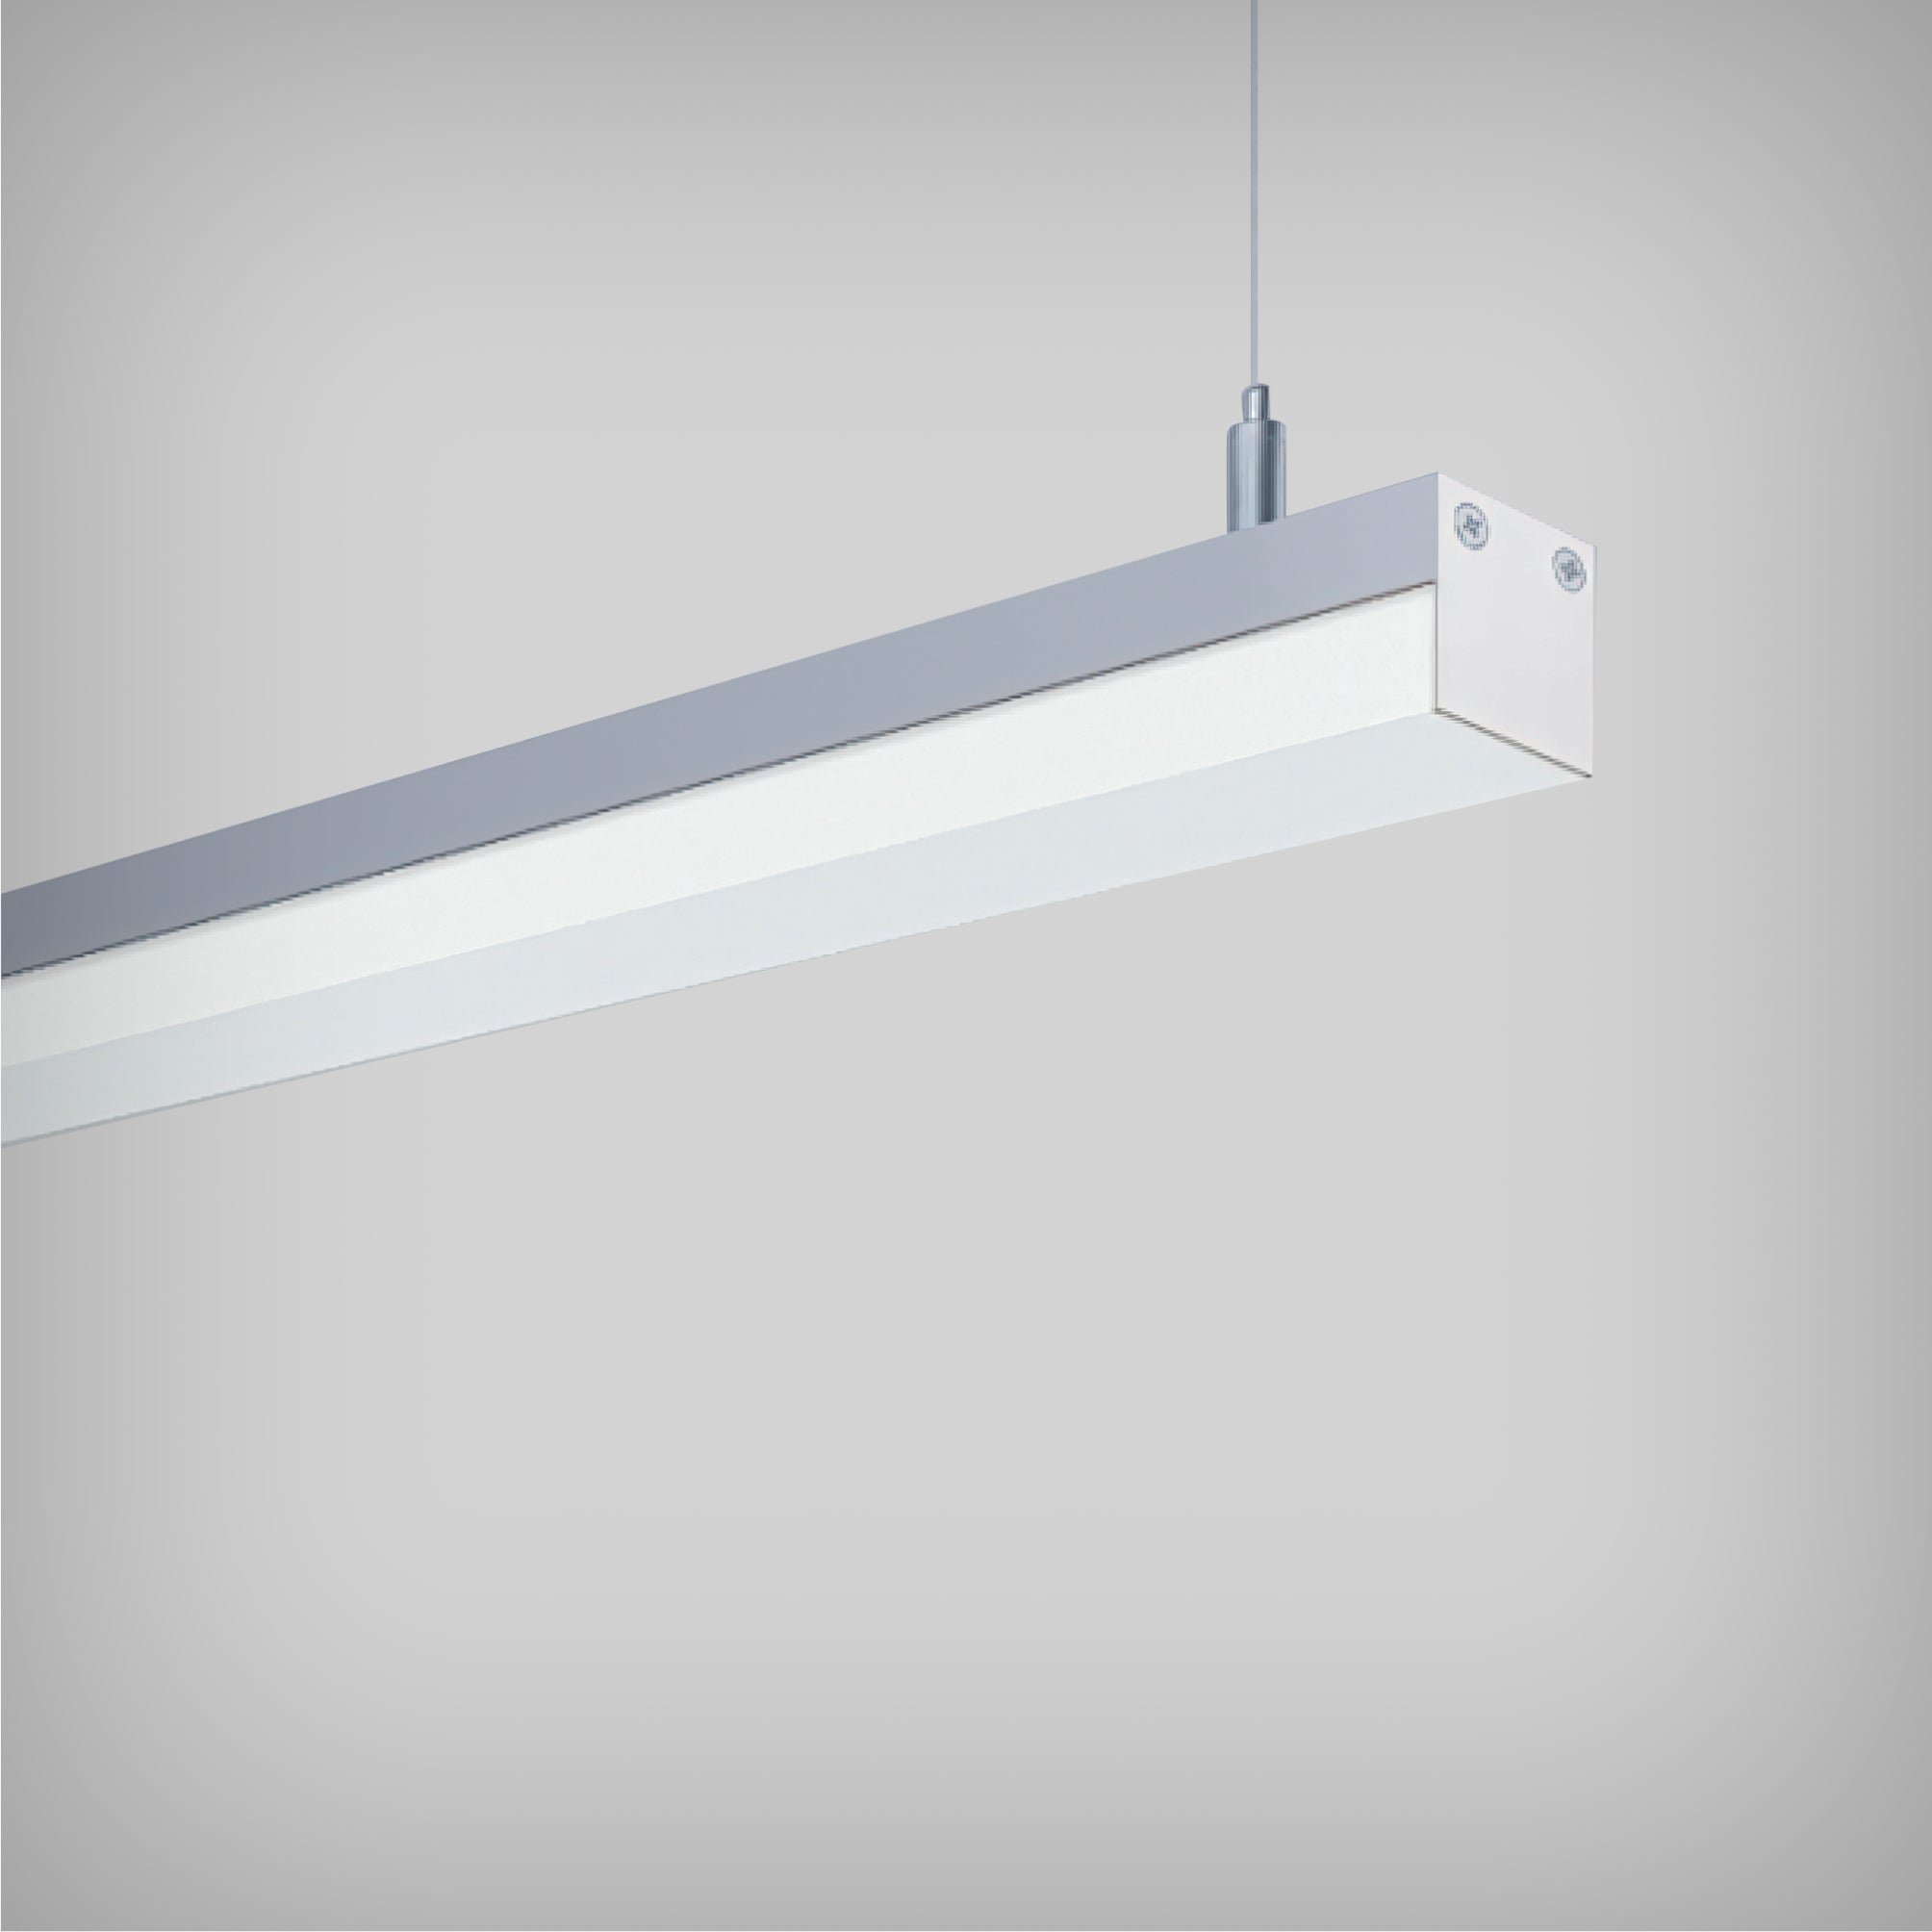 Slim LED Linear Pendant Light with a 0.75-Inch Design